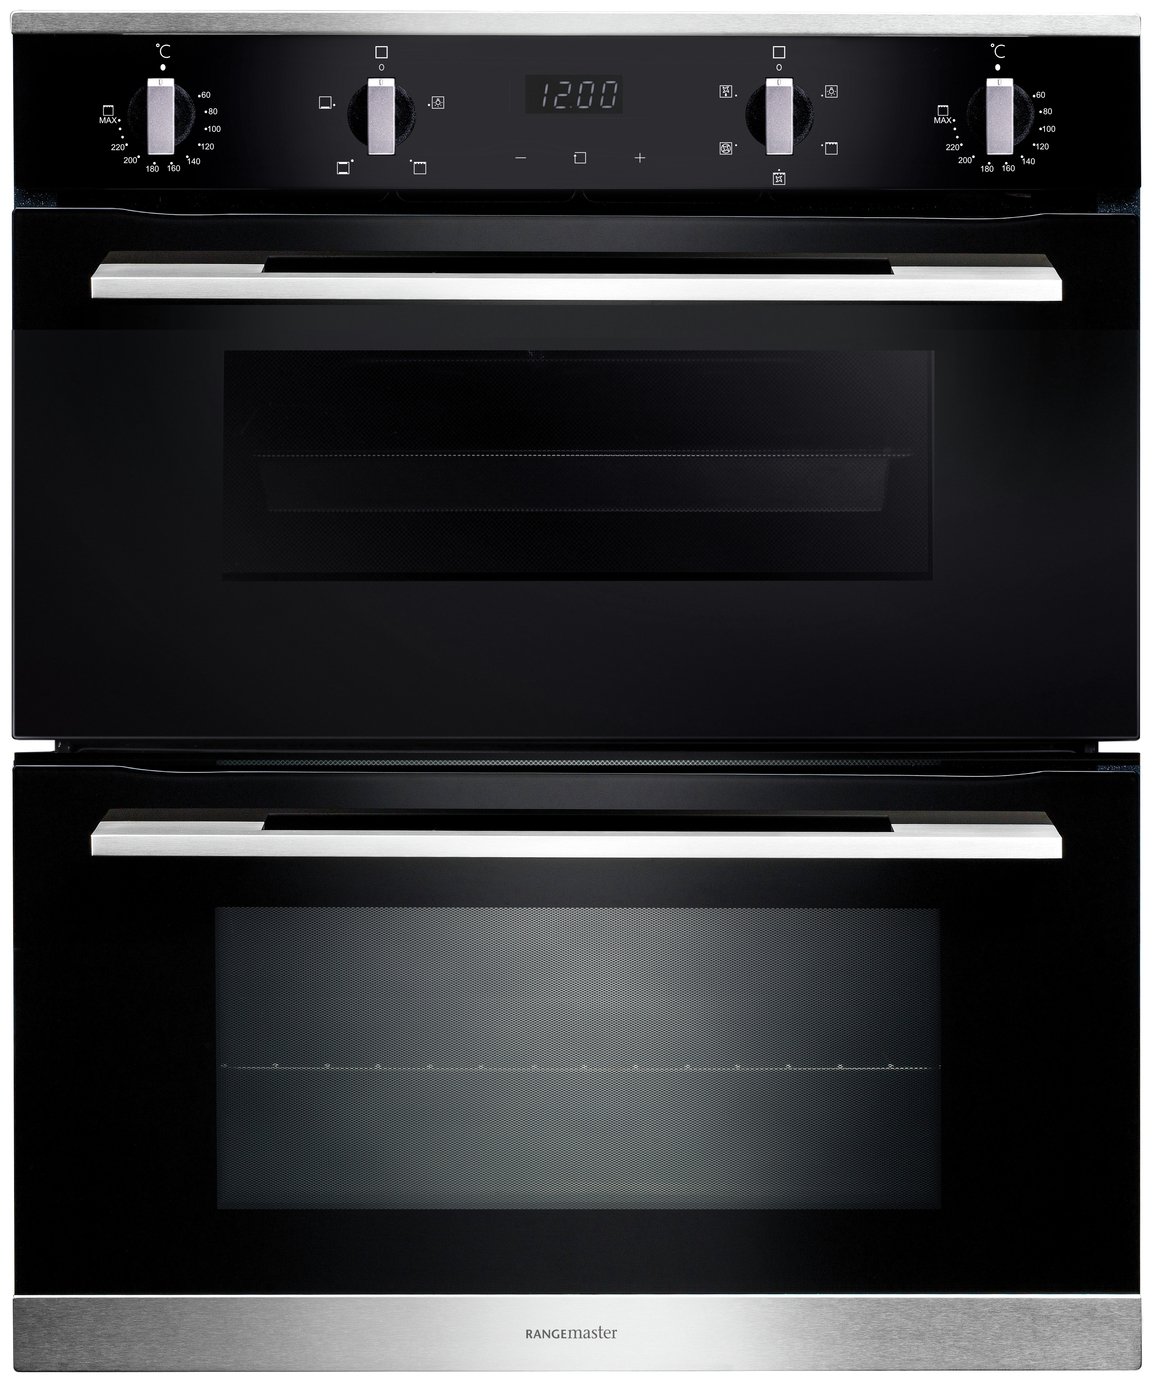 Rangemaster RMB7245BL/SS Electric Double Oven - Black